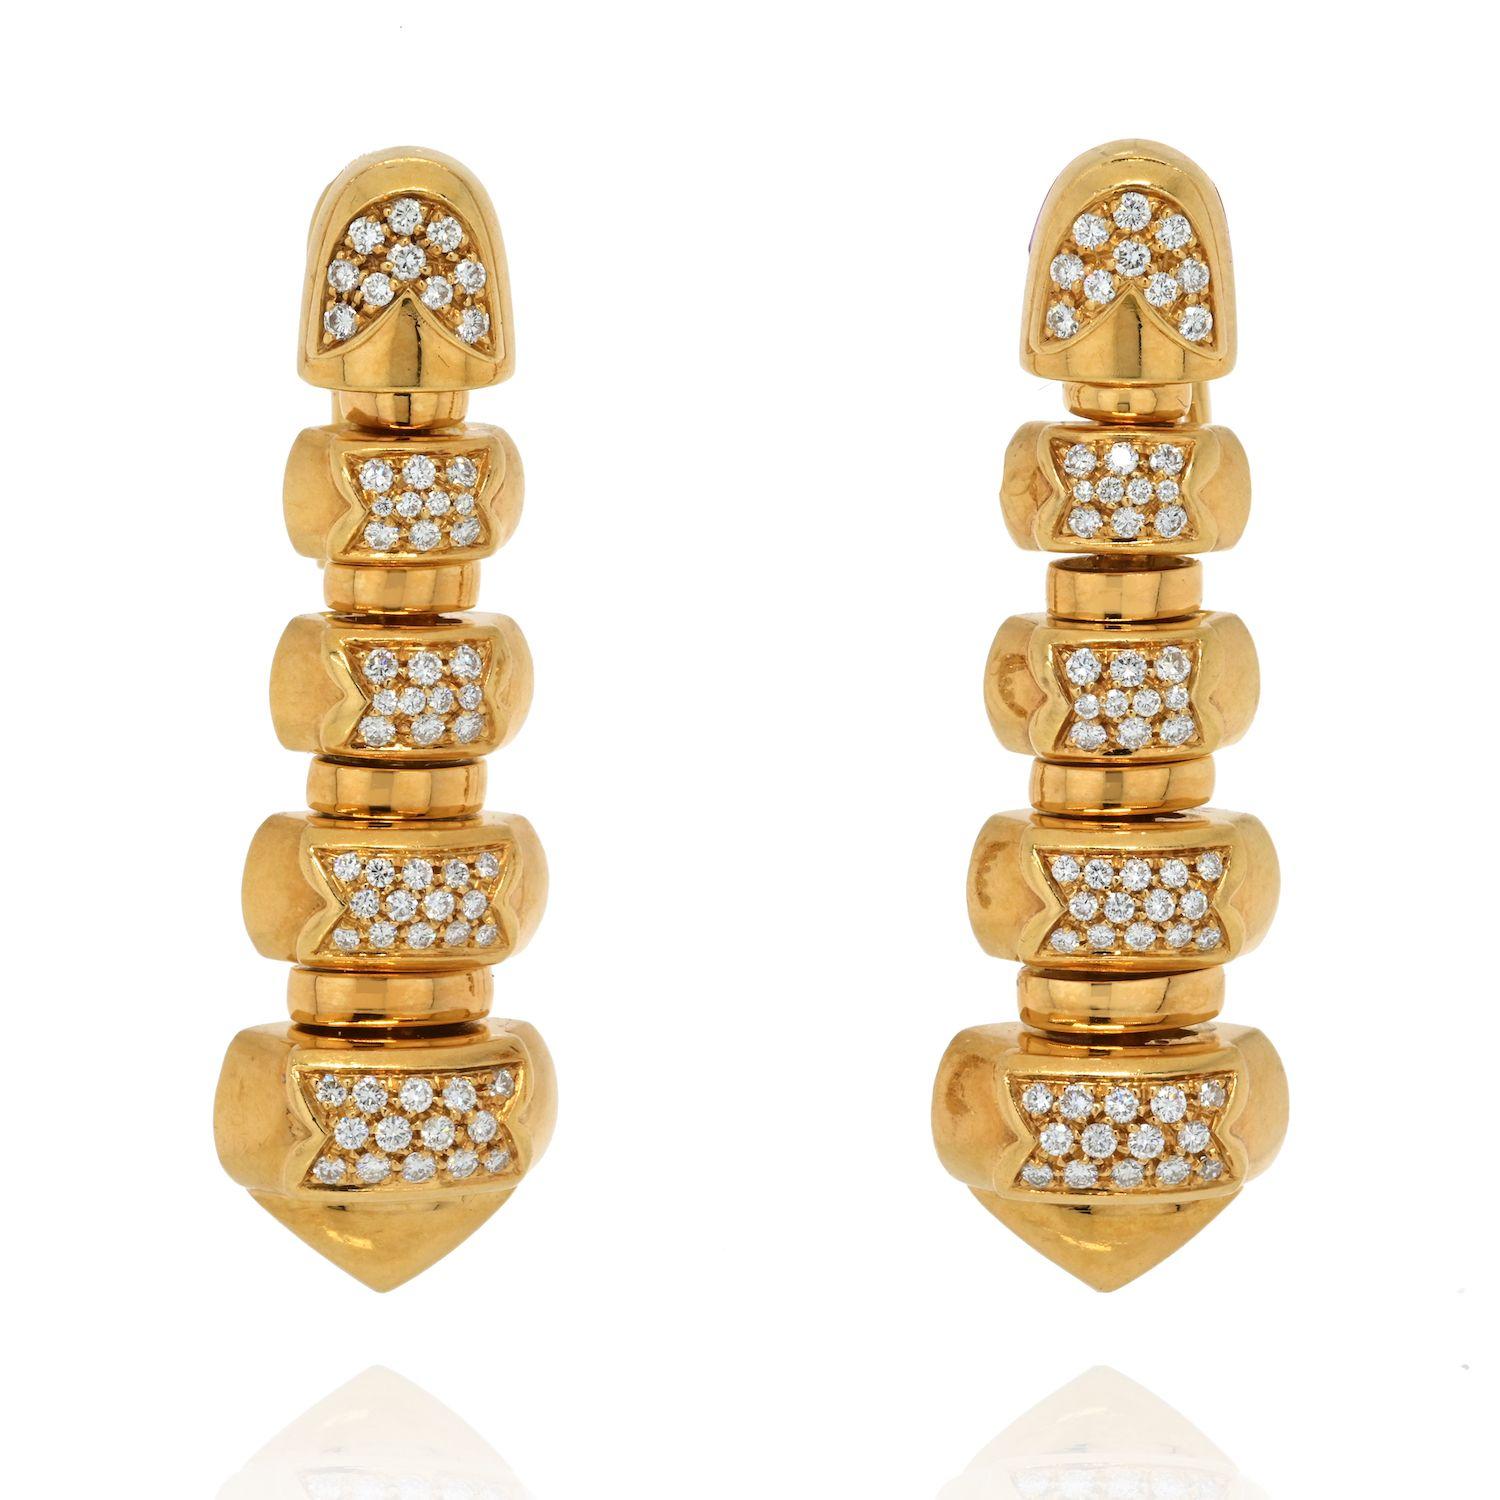 Bvlgari 18K Yellow Gold pair of long earrings. Collection Celtica. created in Roma, Italy. High polished yellow gold. each earrings is composed of 5 graduated rounded rectangular bombe panels with movement. these earrings are incredible once on and